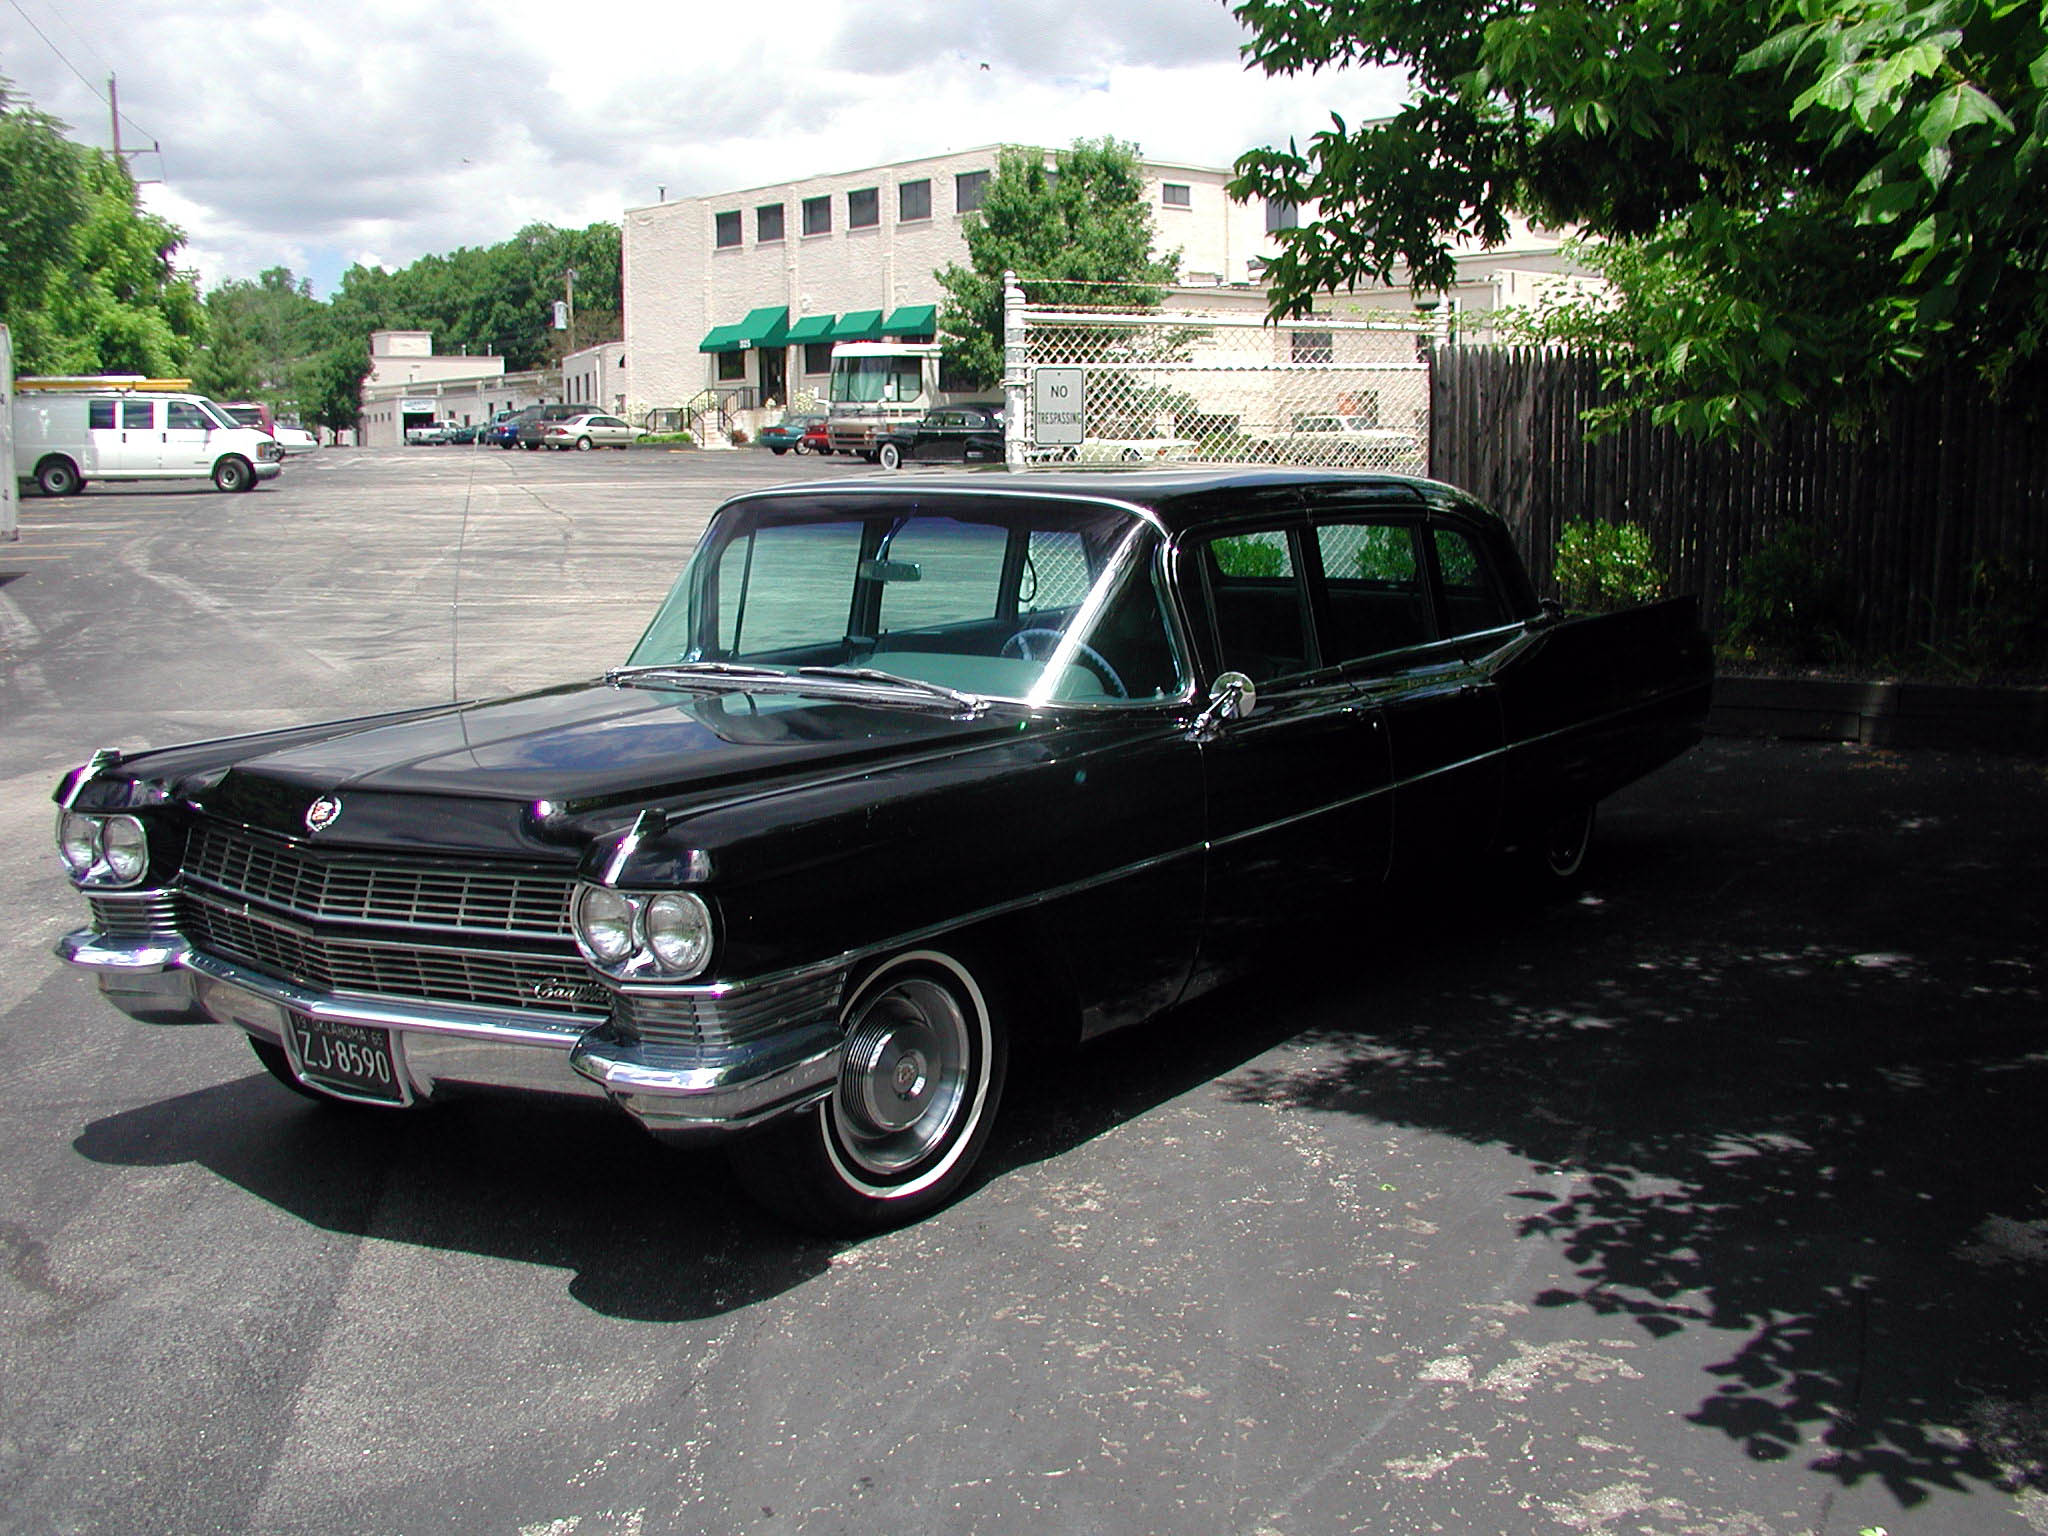 1961 cadillac fleetwood series 75 imperial